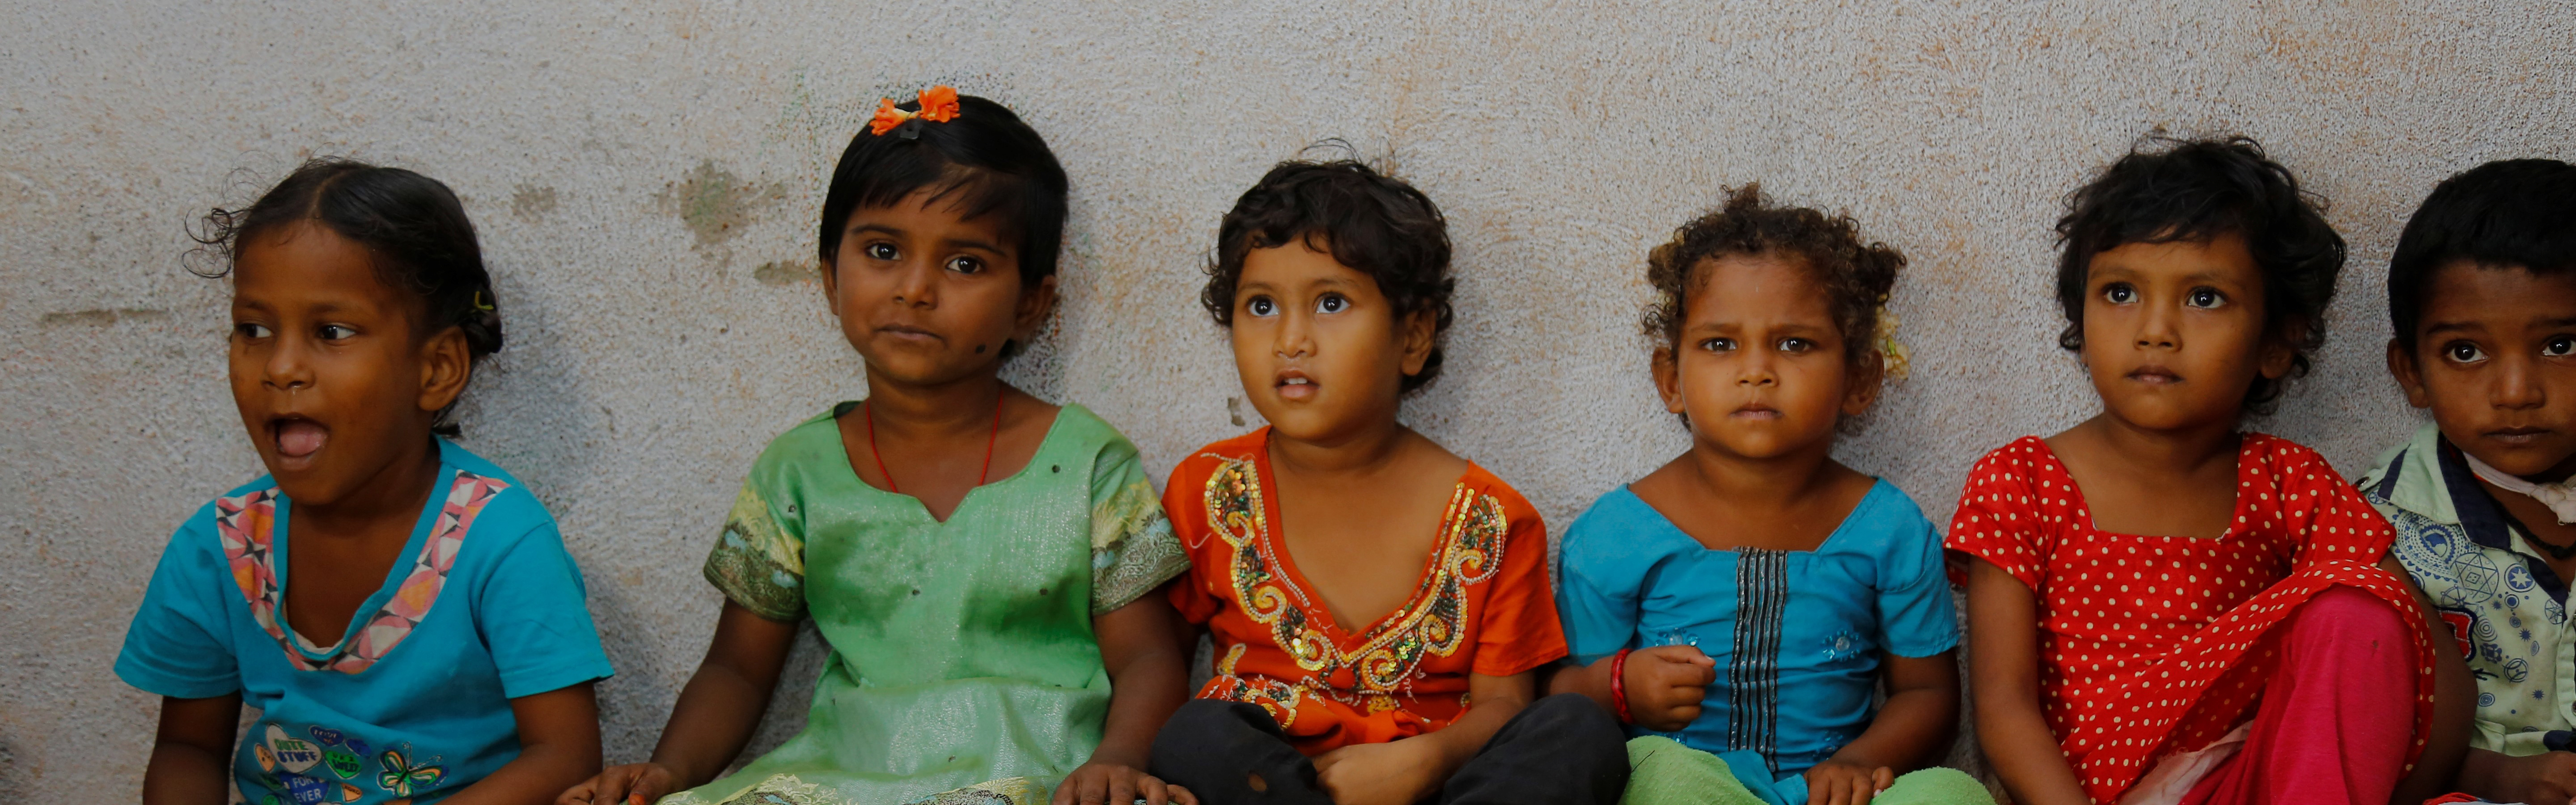 Sponsor an Orphan Child in India